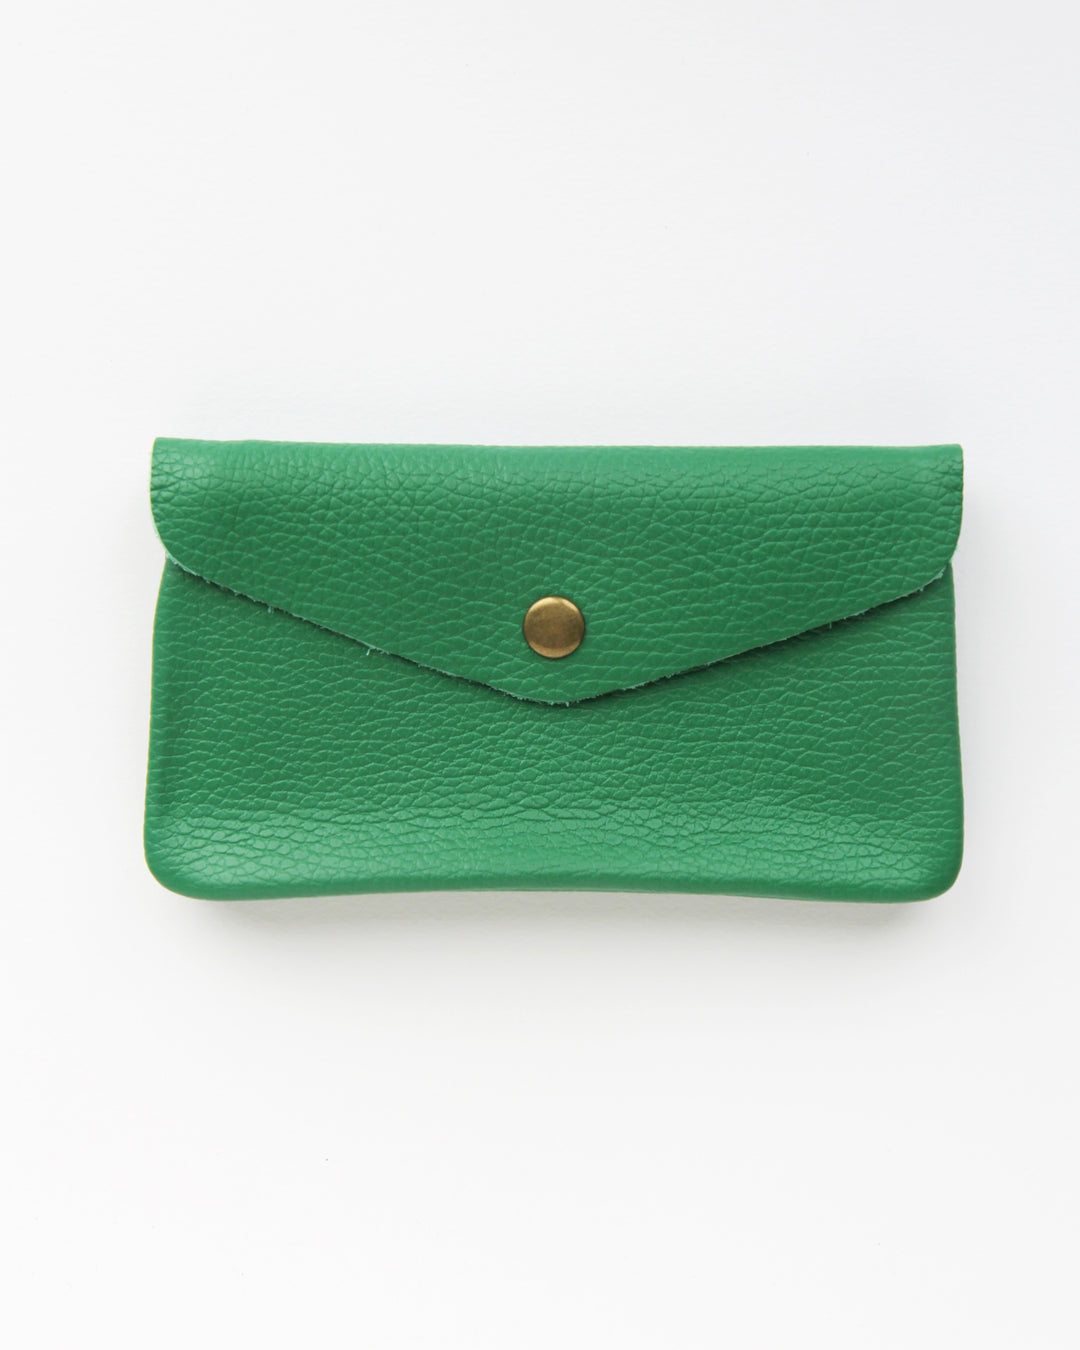 emerald green leather medium sized purse with internal zipped coin pocket